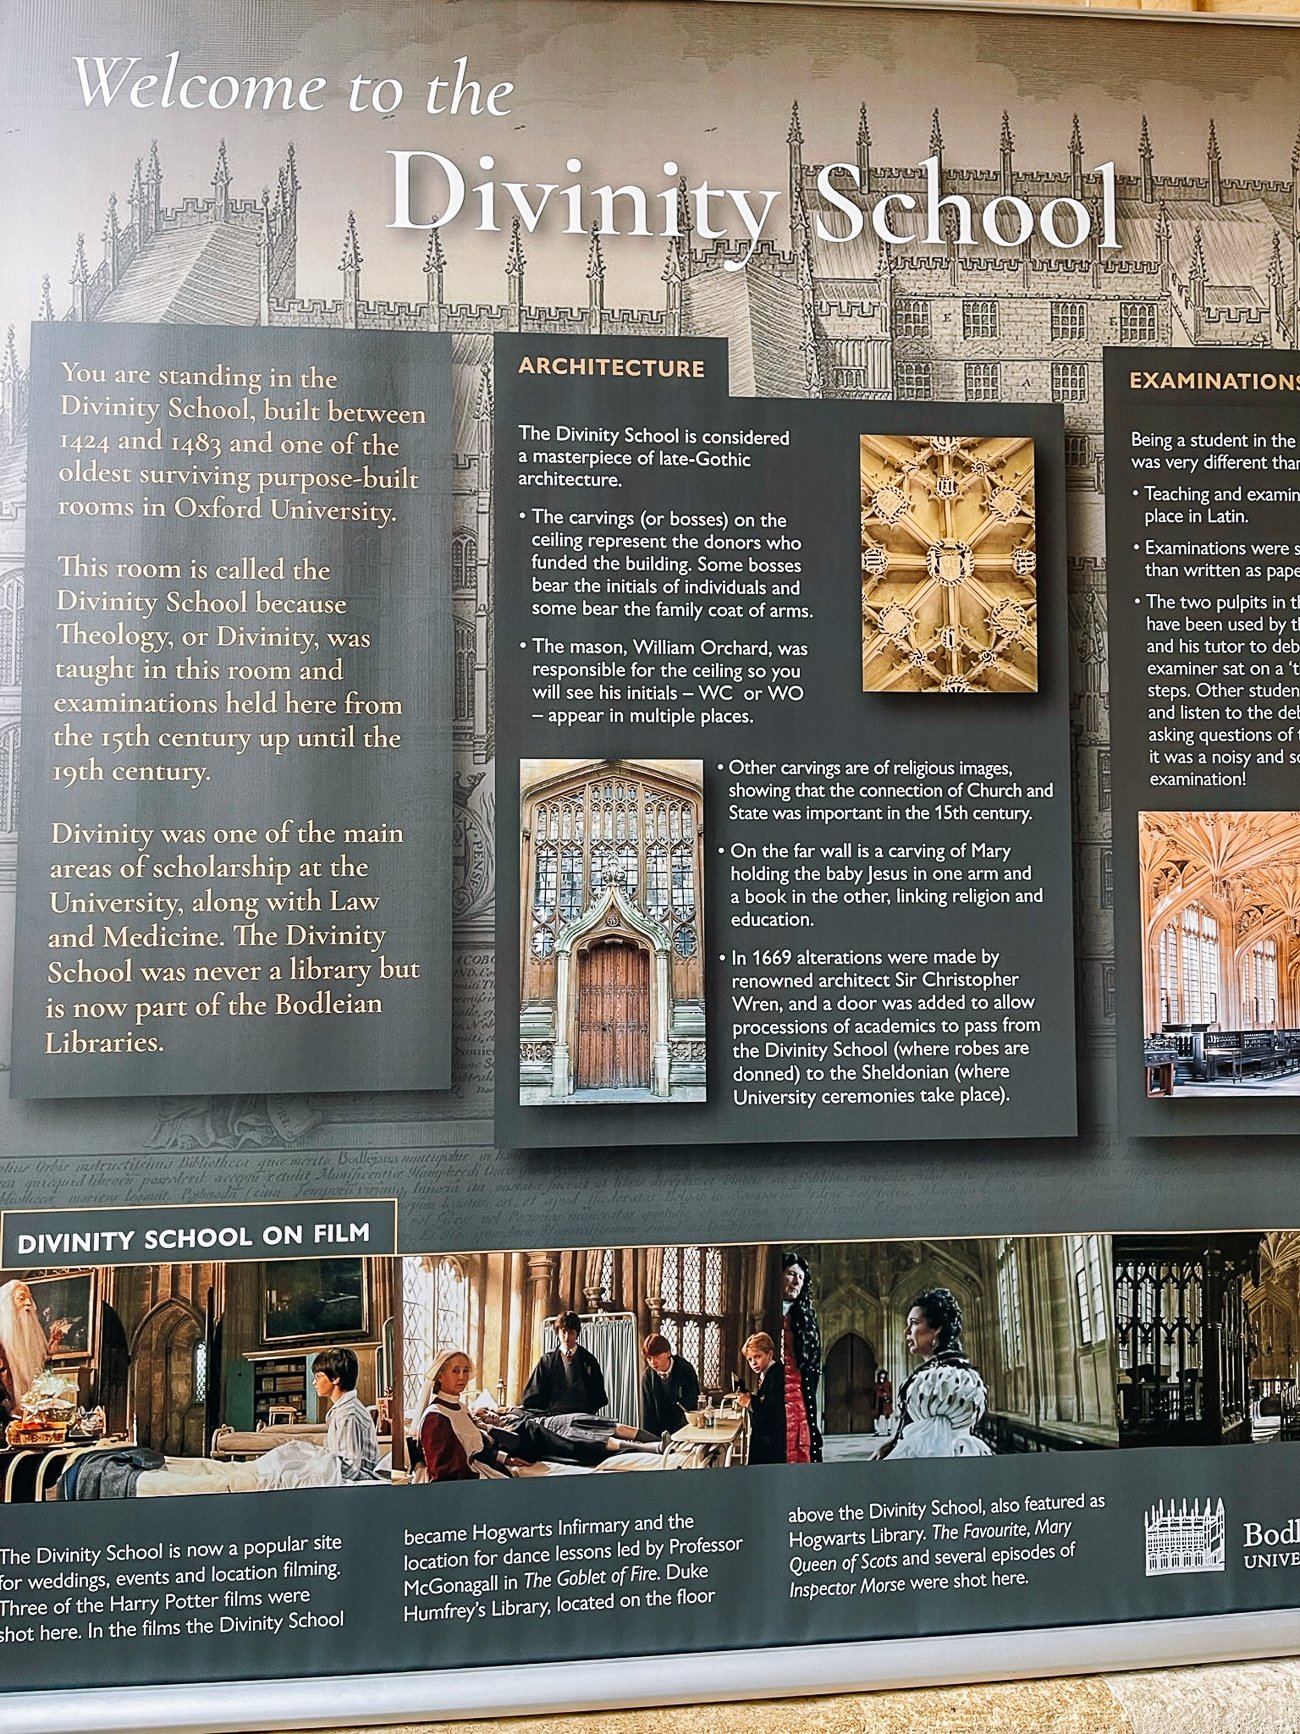 The Divinity School in Oxford University signage describing architecture and film appearances in Harry Potter films